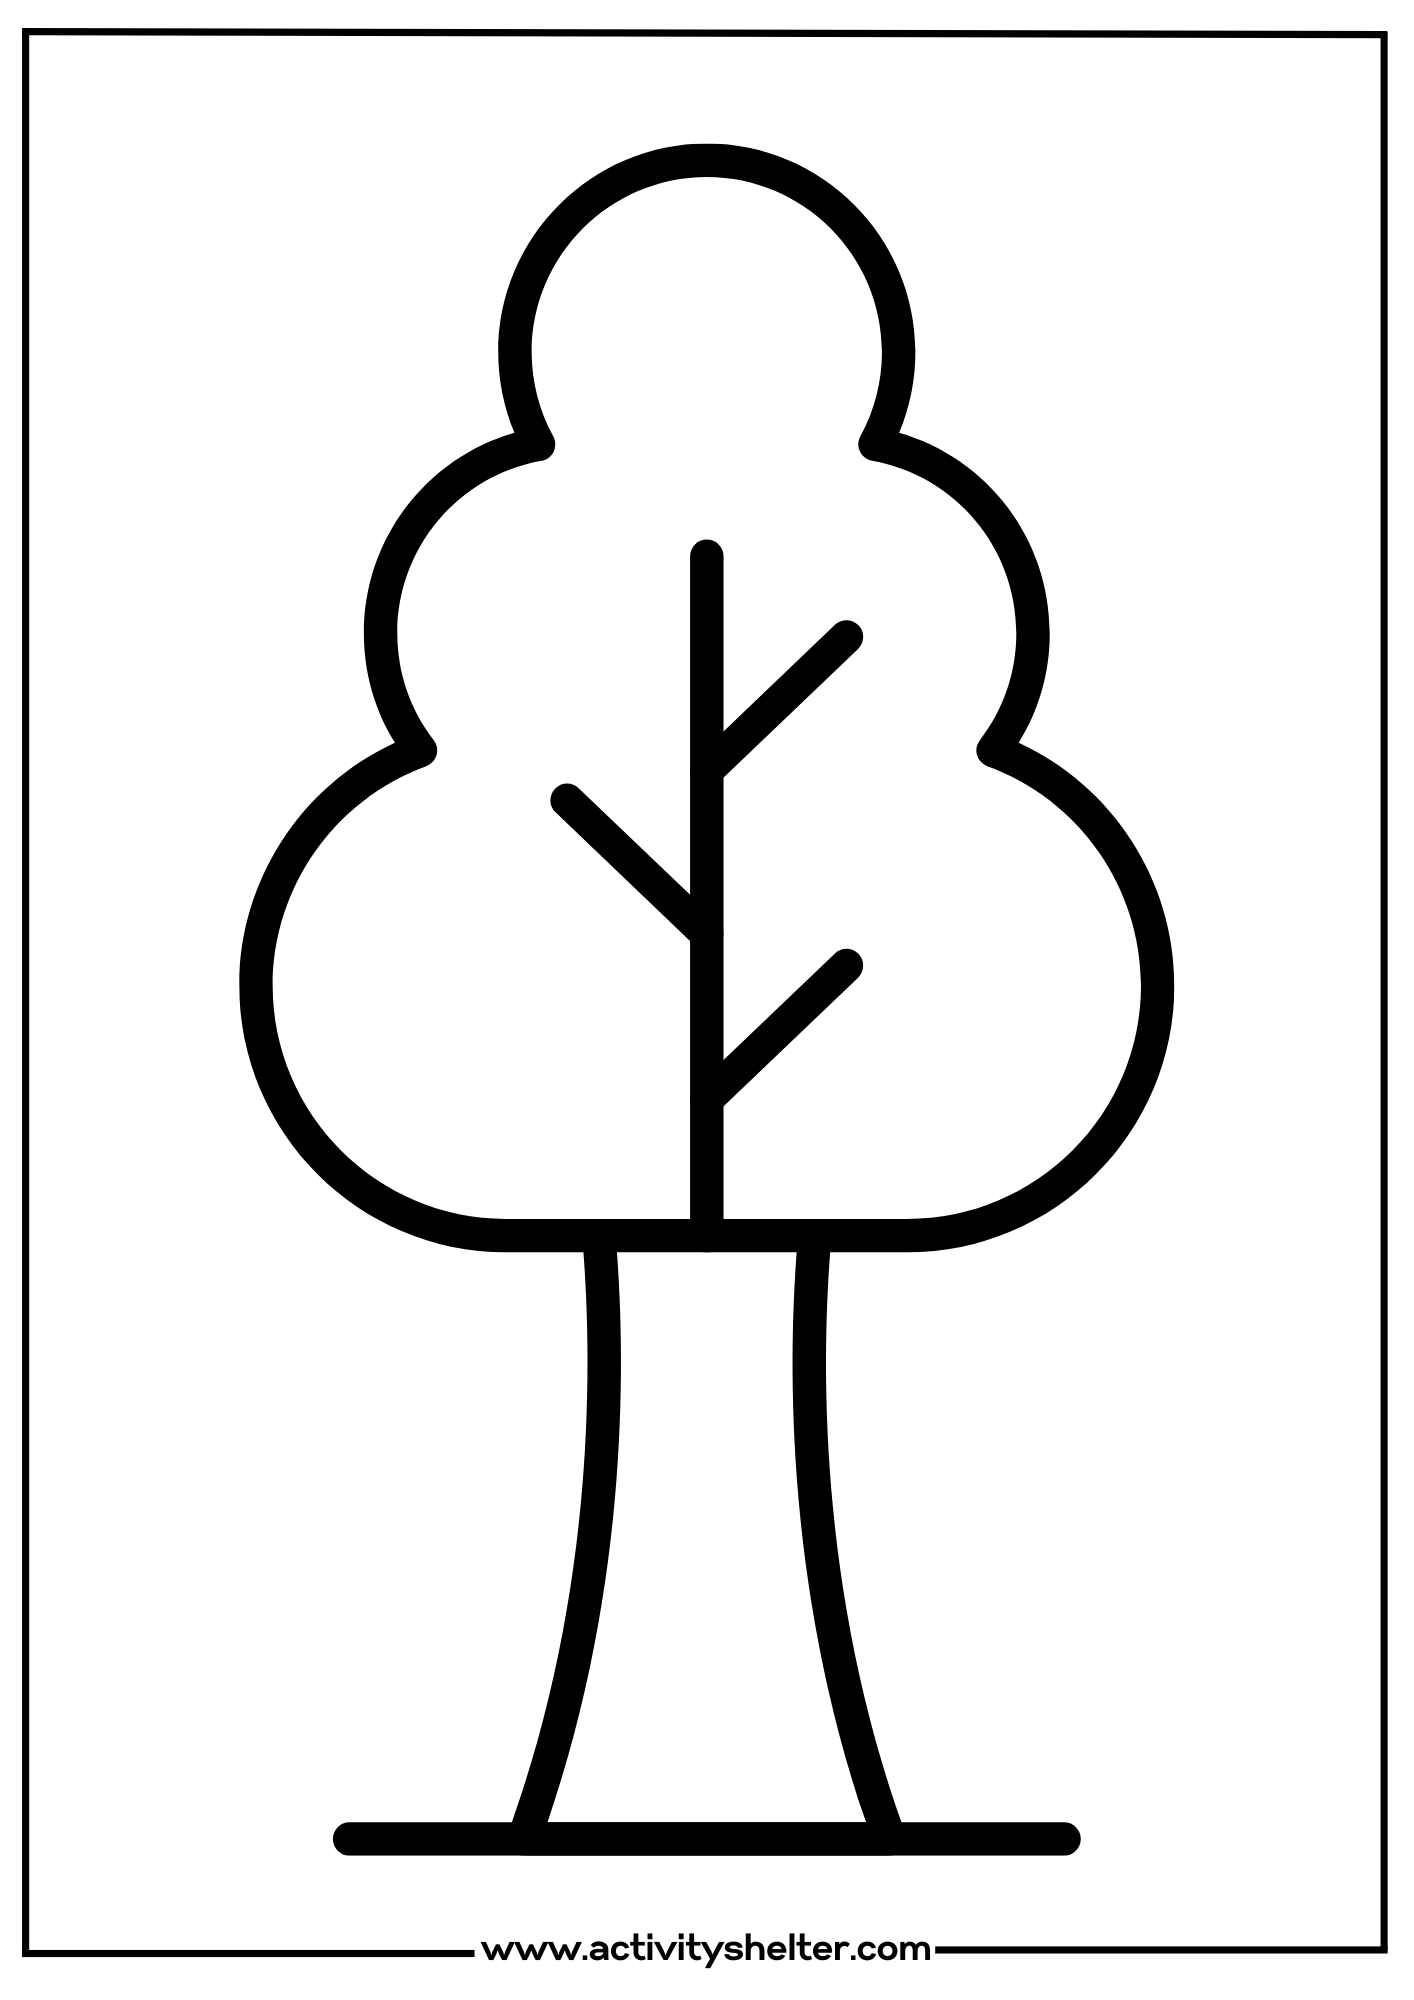 printable outlines of trees